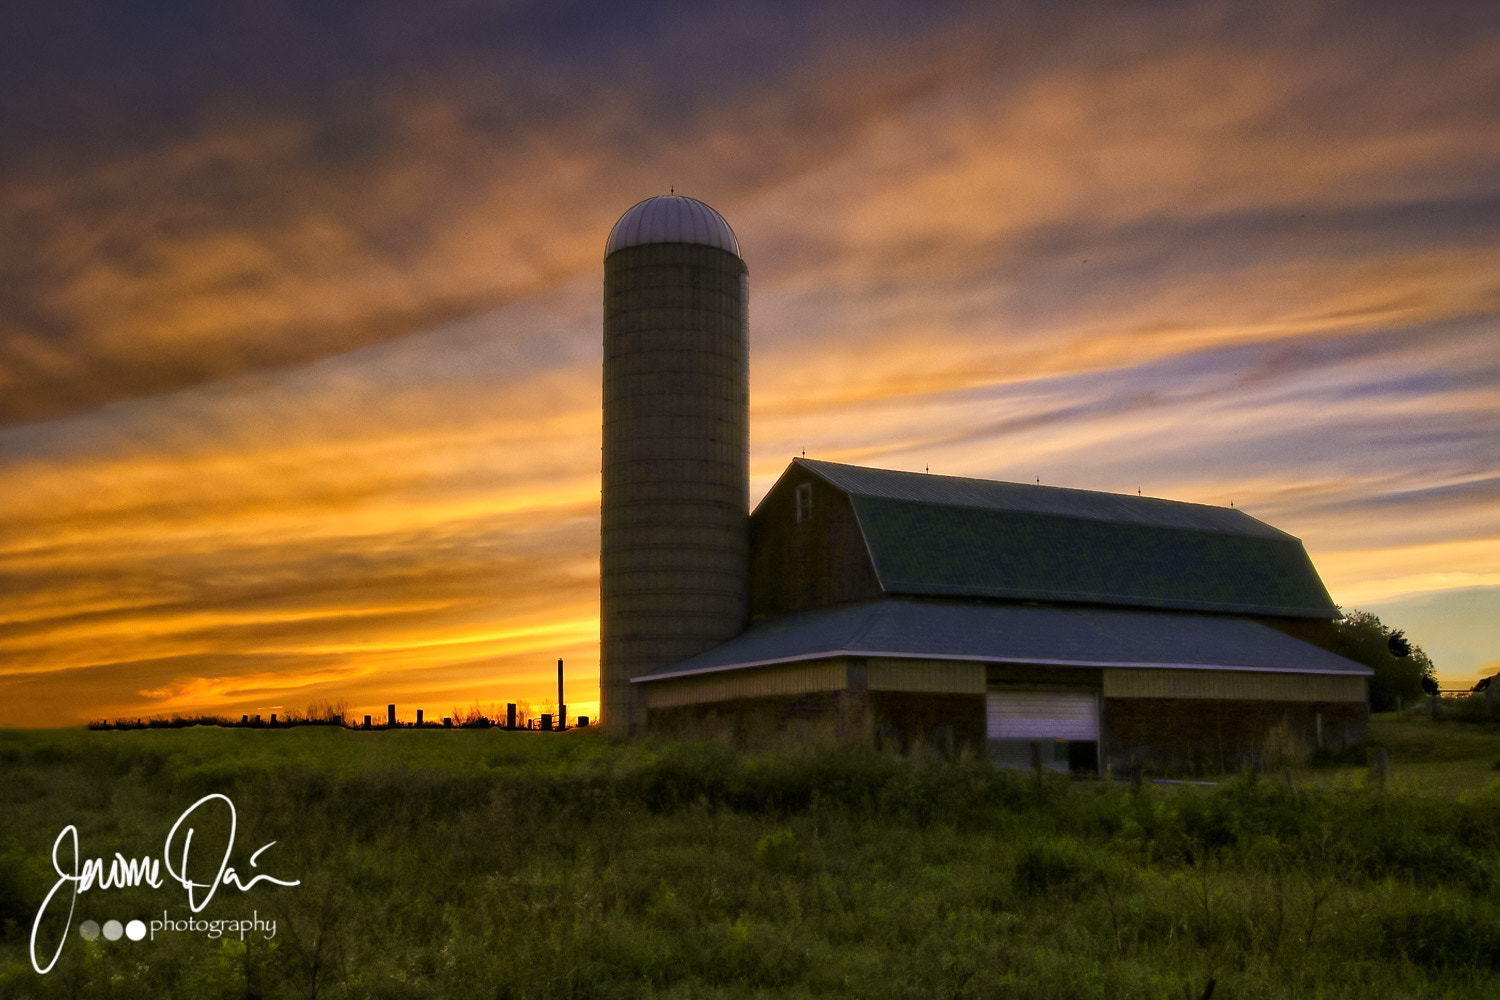 Canon EOS 7D Mark II + Sigma 24-105mm f/4 DG OS HSM | A sample photo. Sunset in penfield photography